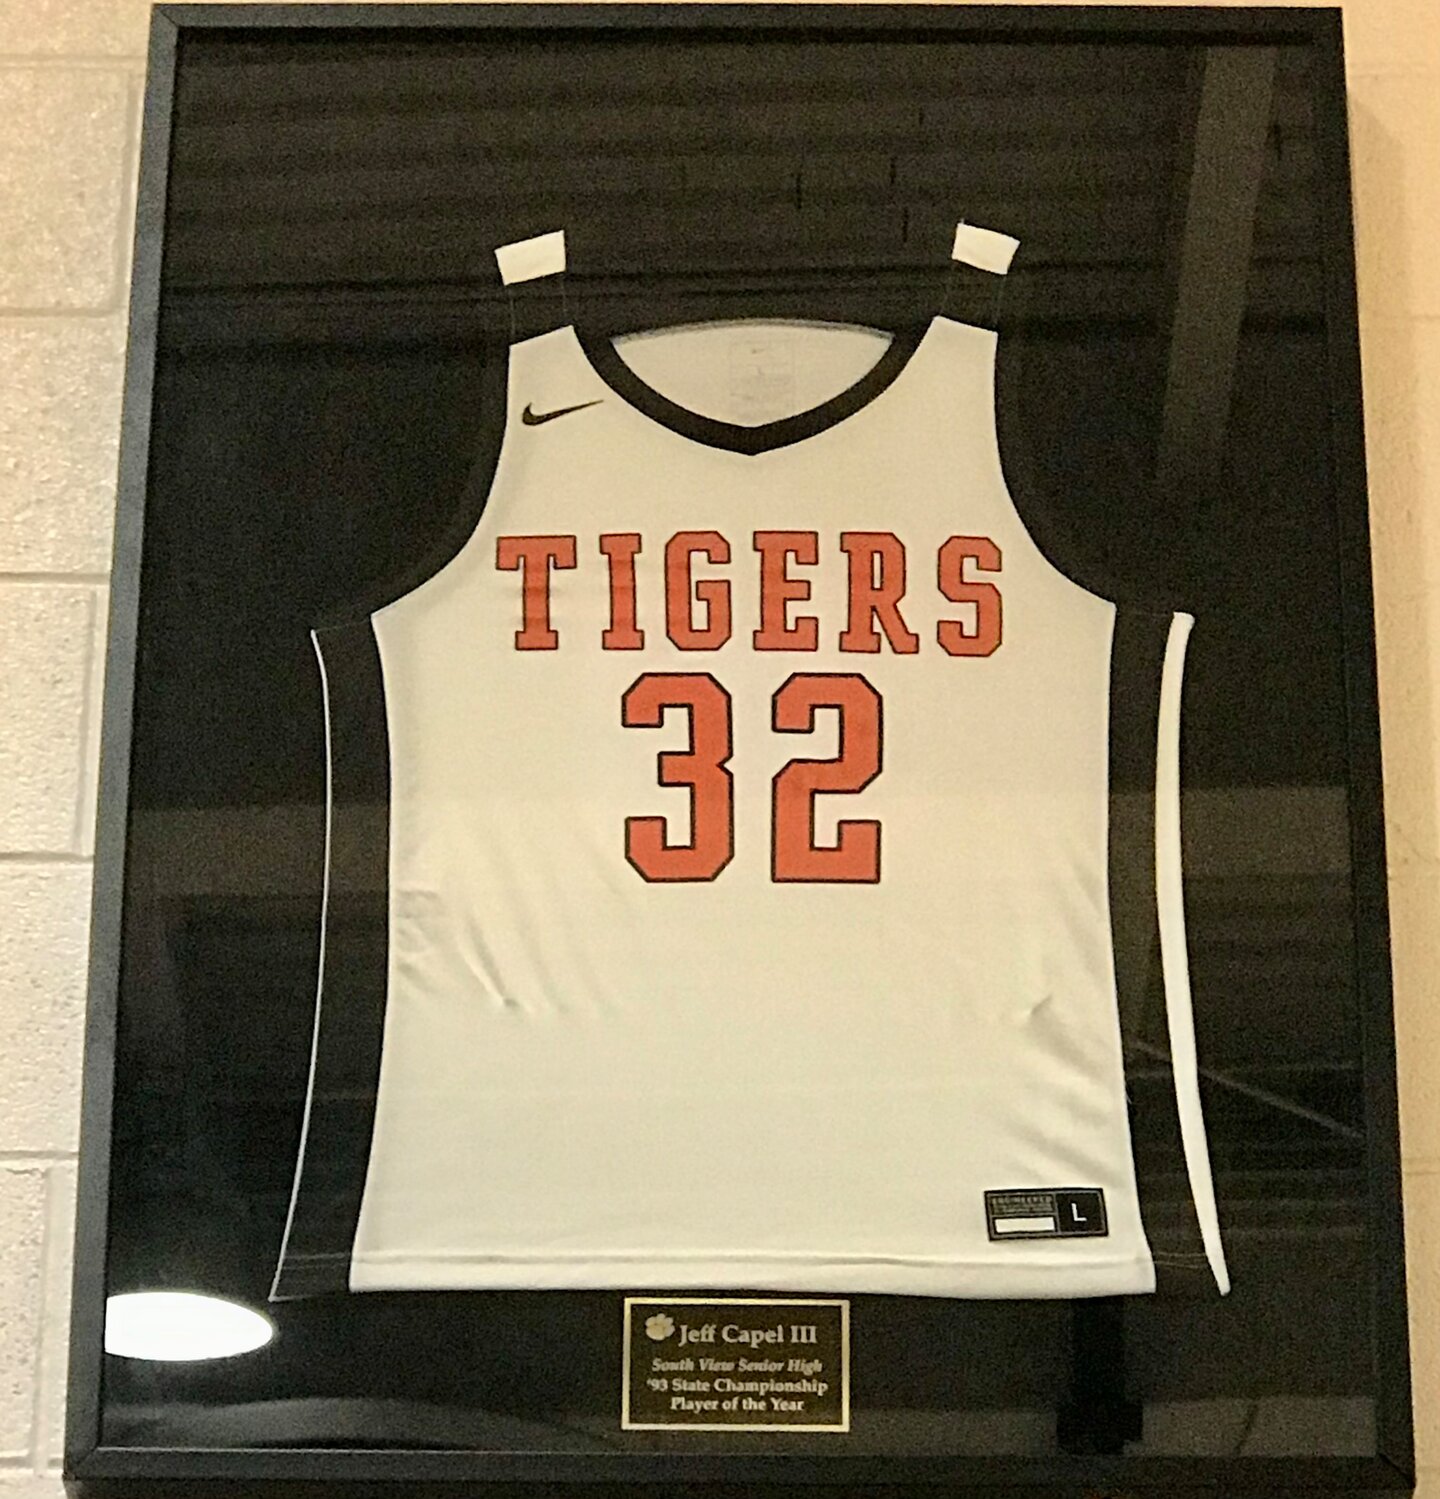 Jersey on Miller Gym wall.